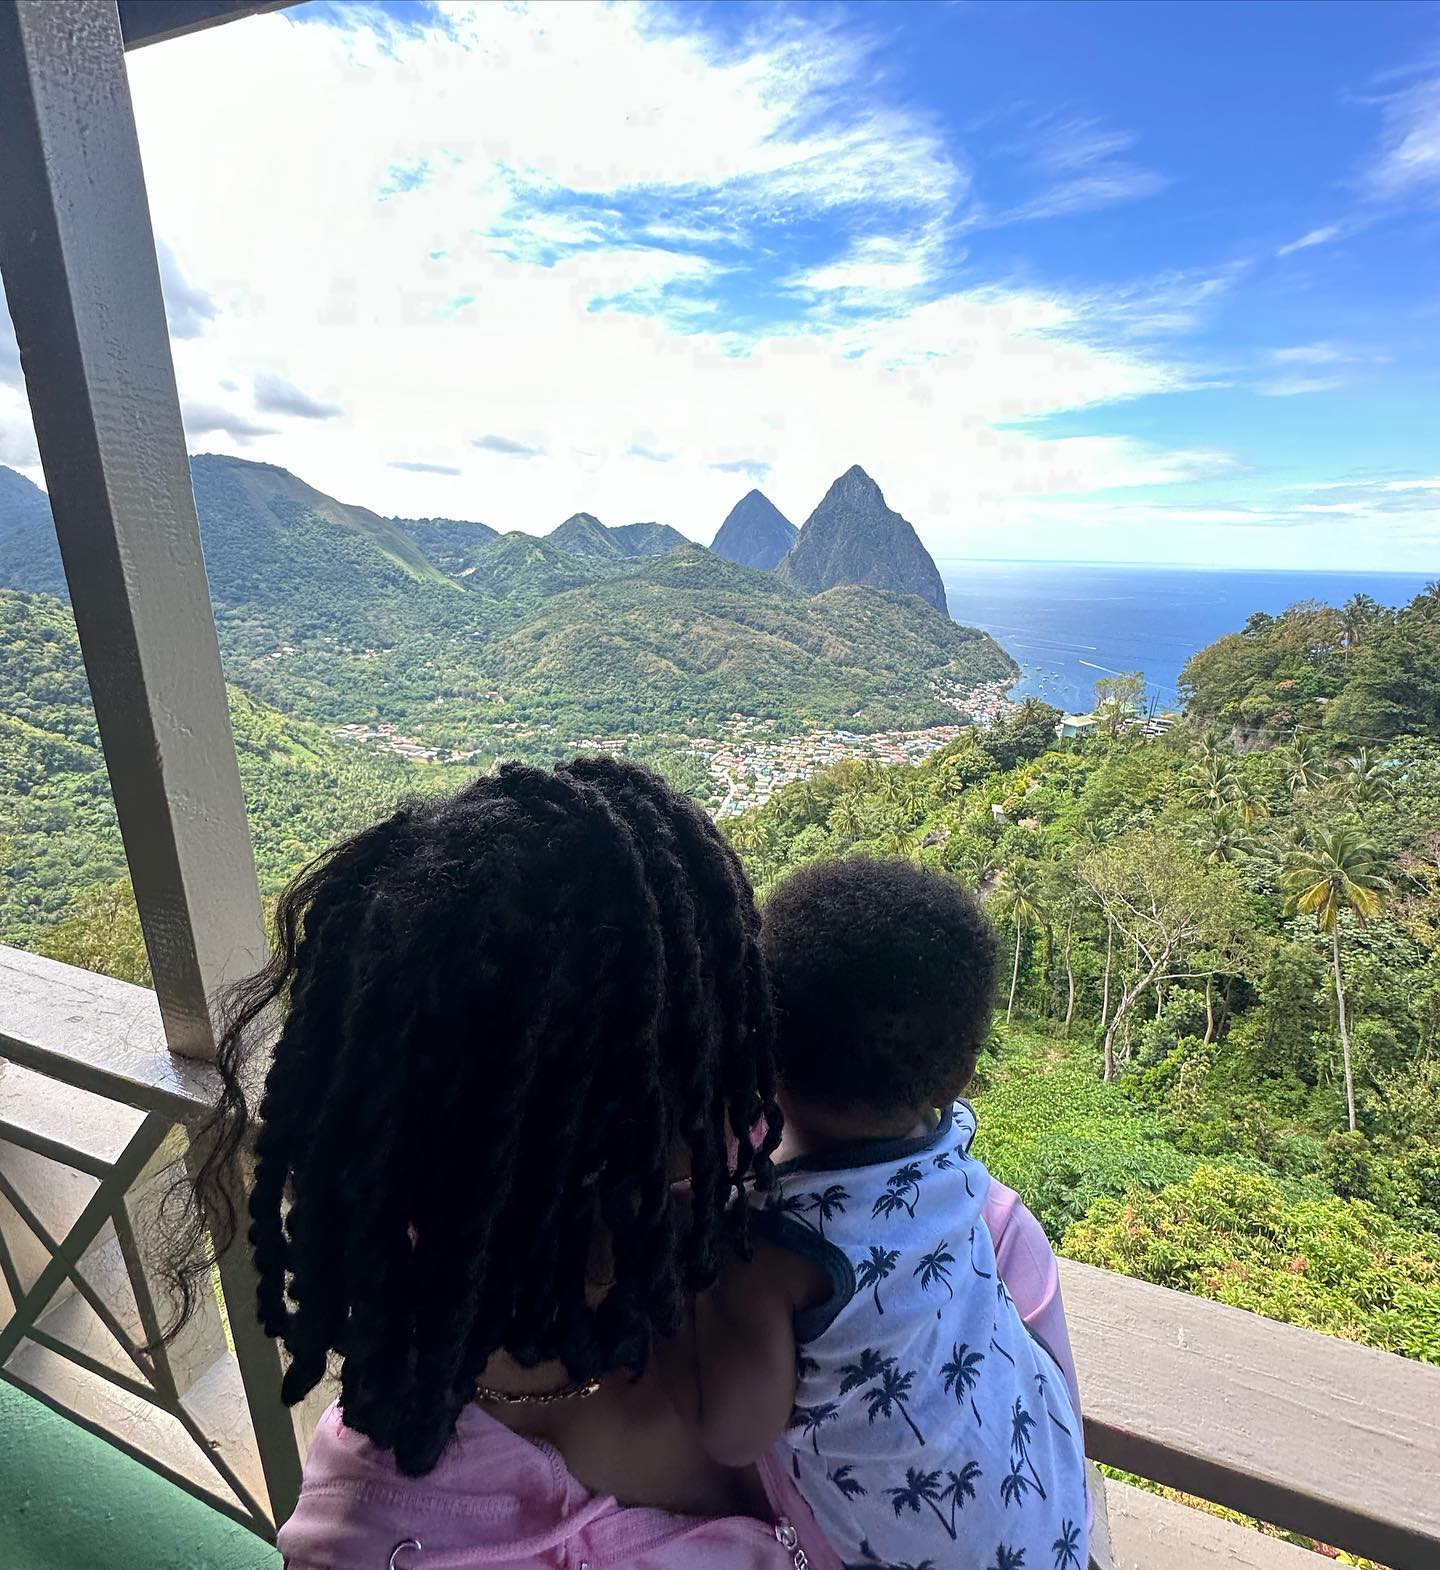 Halle held baby Halo while overlooking St. Lucia